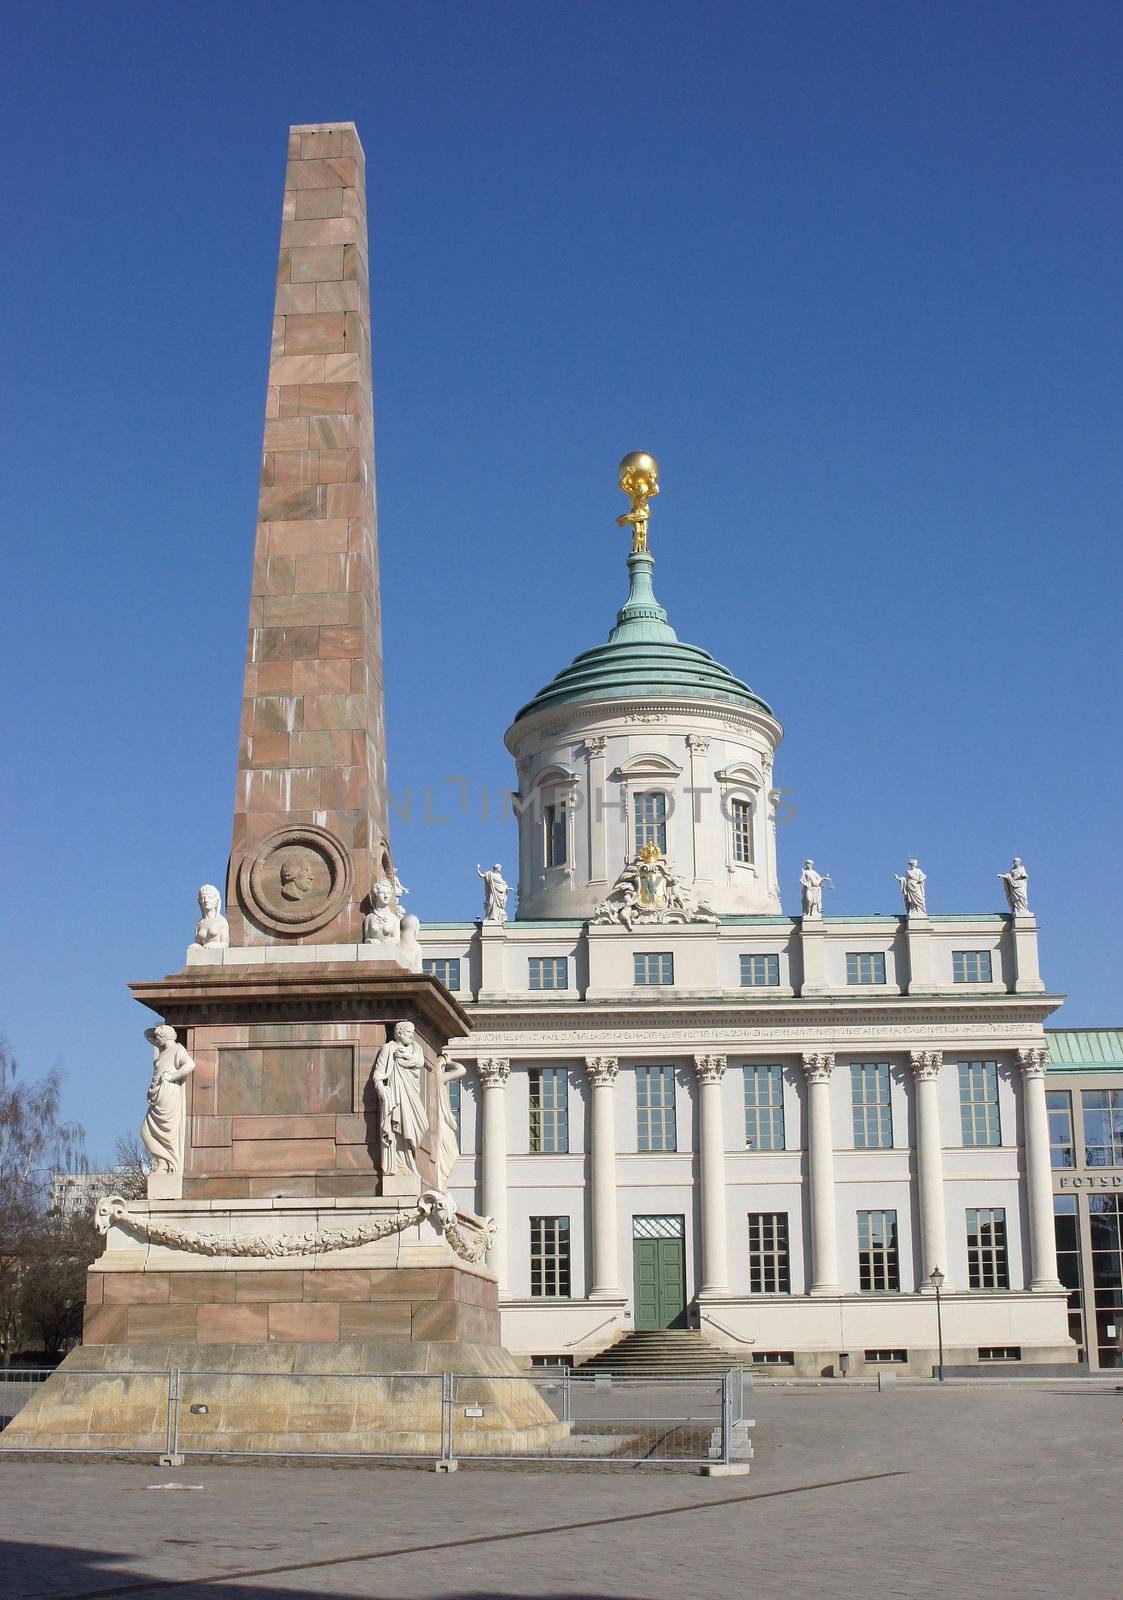 Obelisk and historic town hall, Potsdam, Germany, Europe